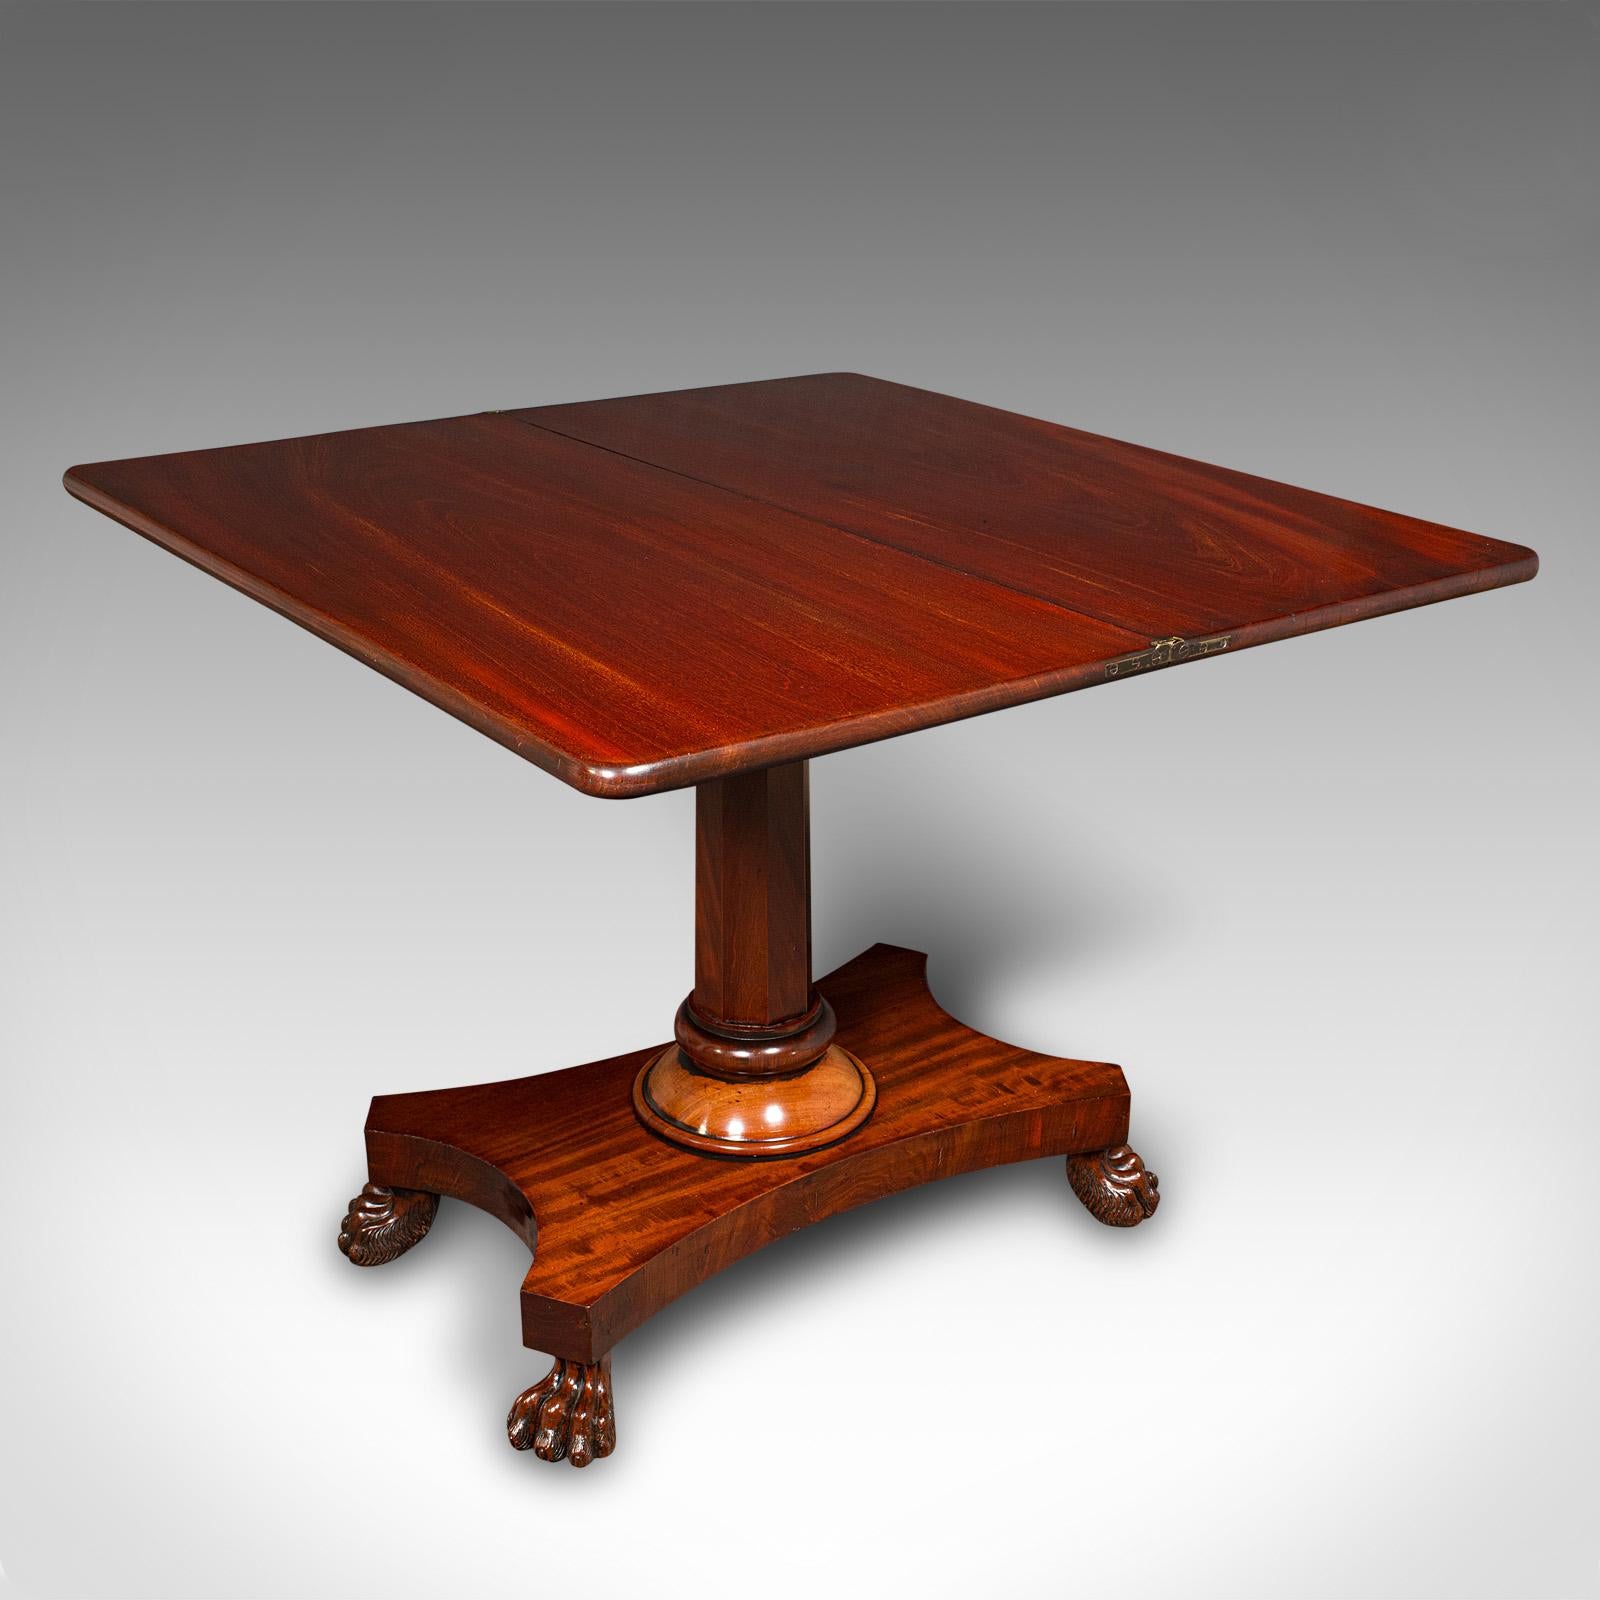 This is an antique fold over tea table. An English, mahogany occasional table, dating to the William IV period, circa 1835.

Beautifully presented table with a fine rotating and extending top
Displays a desirable aged patina and in very good